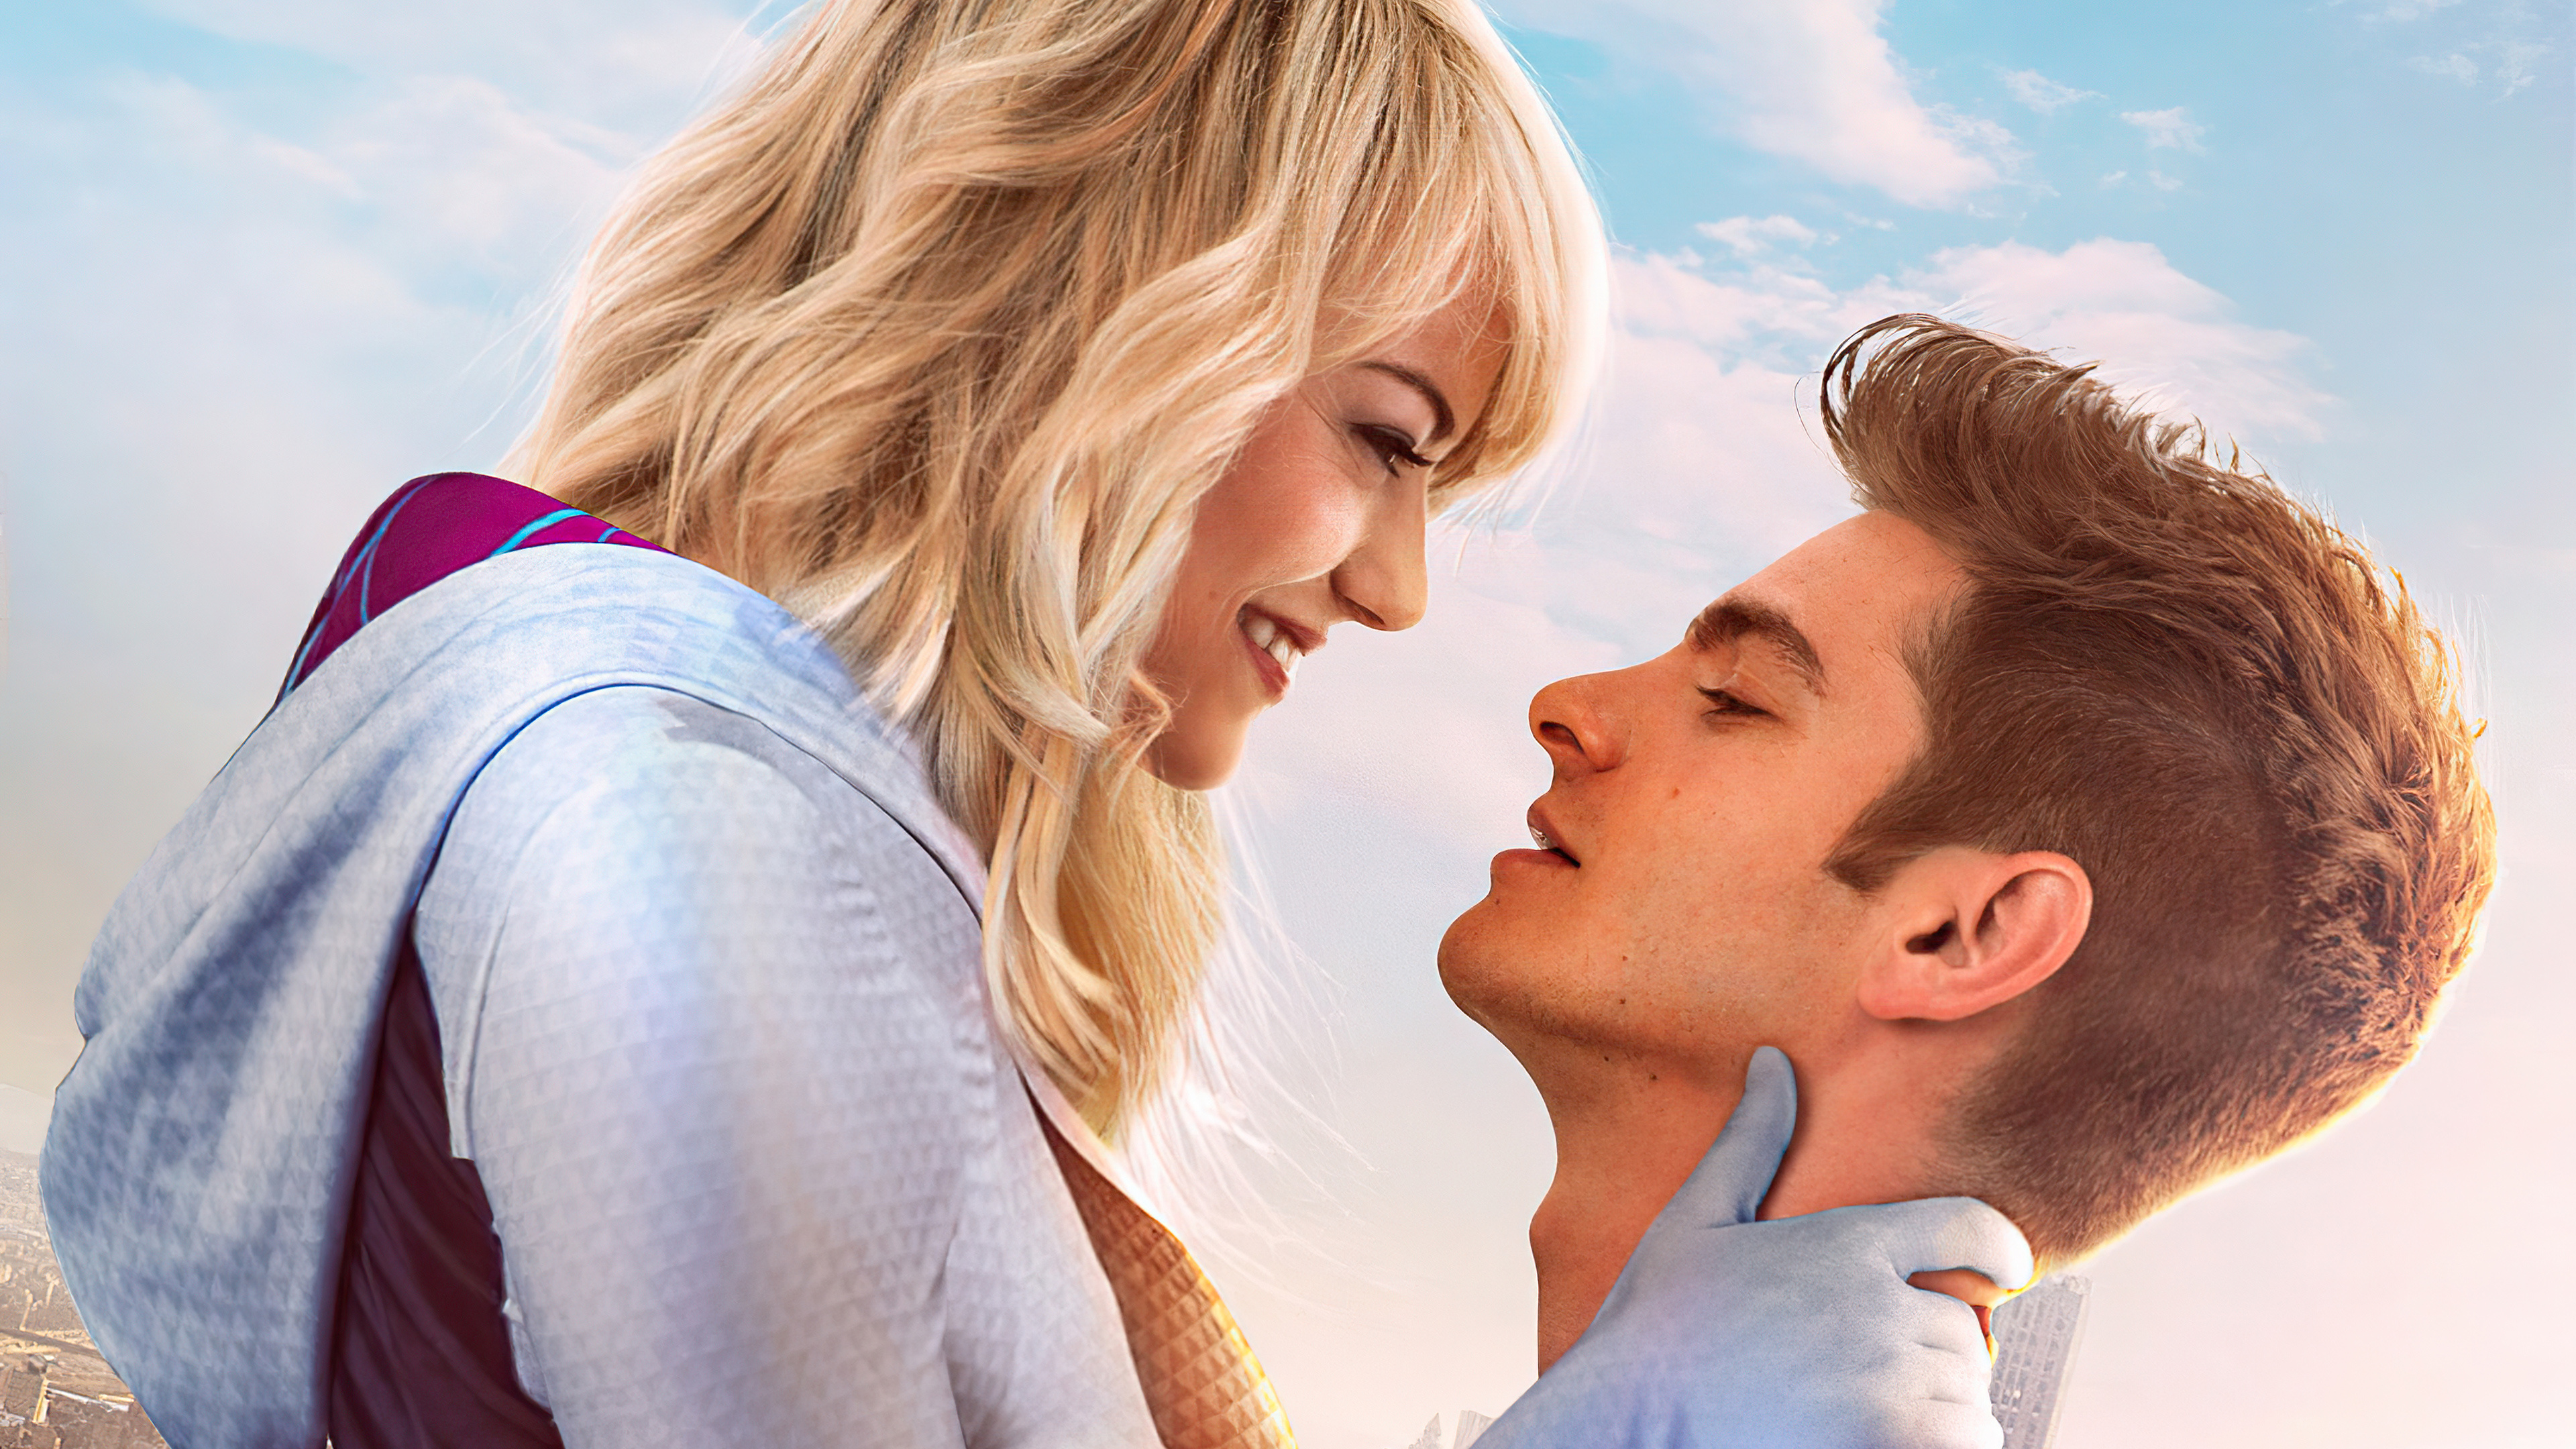 Spider-Man and Gwen Stacy, 4K HD wallpapers, Superhero power couple, Epic team-up, 3840x2160 4K Desktop